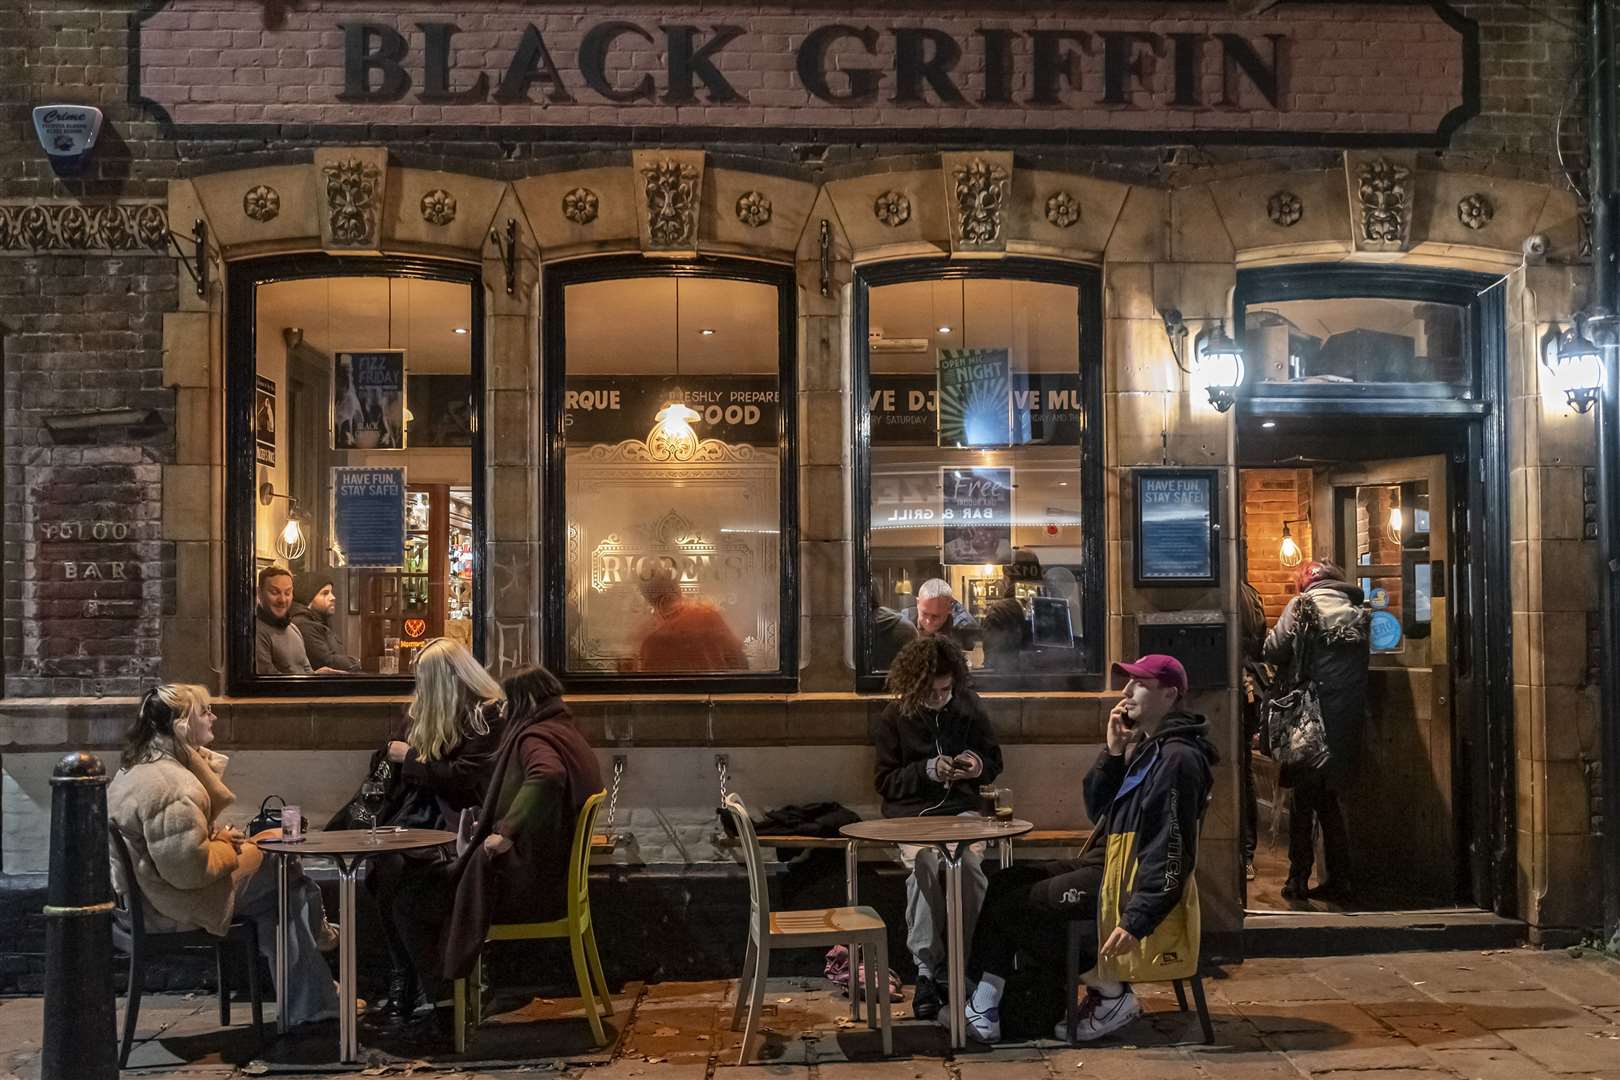 It was busy at the Black Griffin too. Pictures: Jo Court